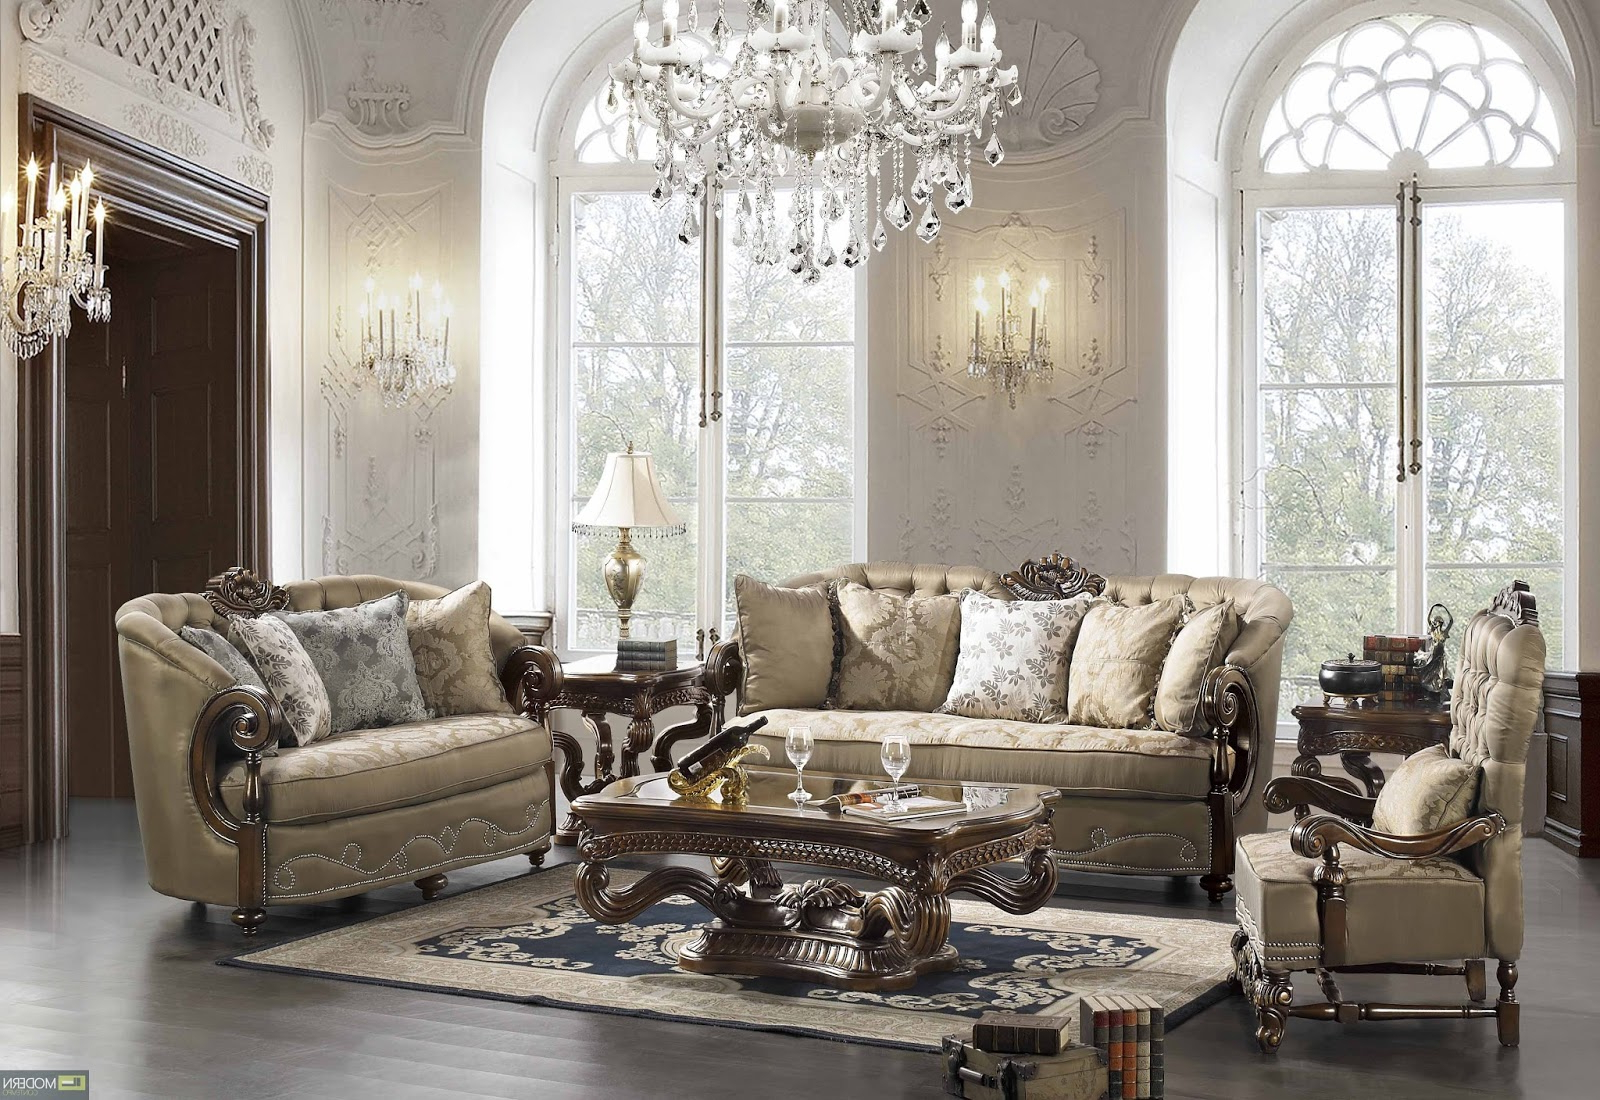 Best Furniture Ideas For Home Traditional Classic